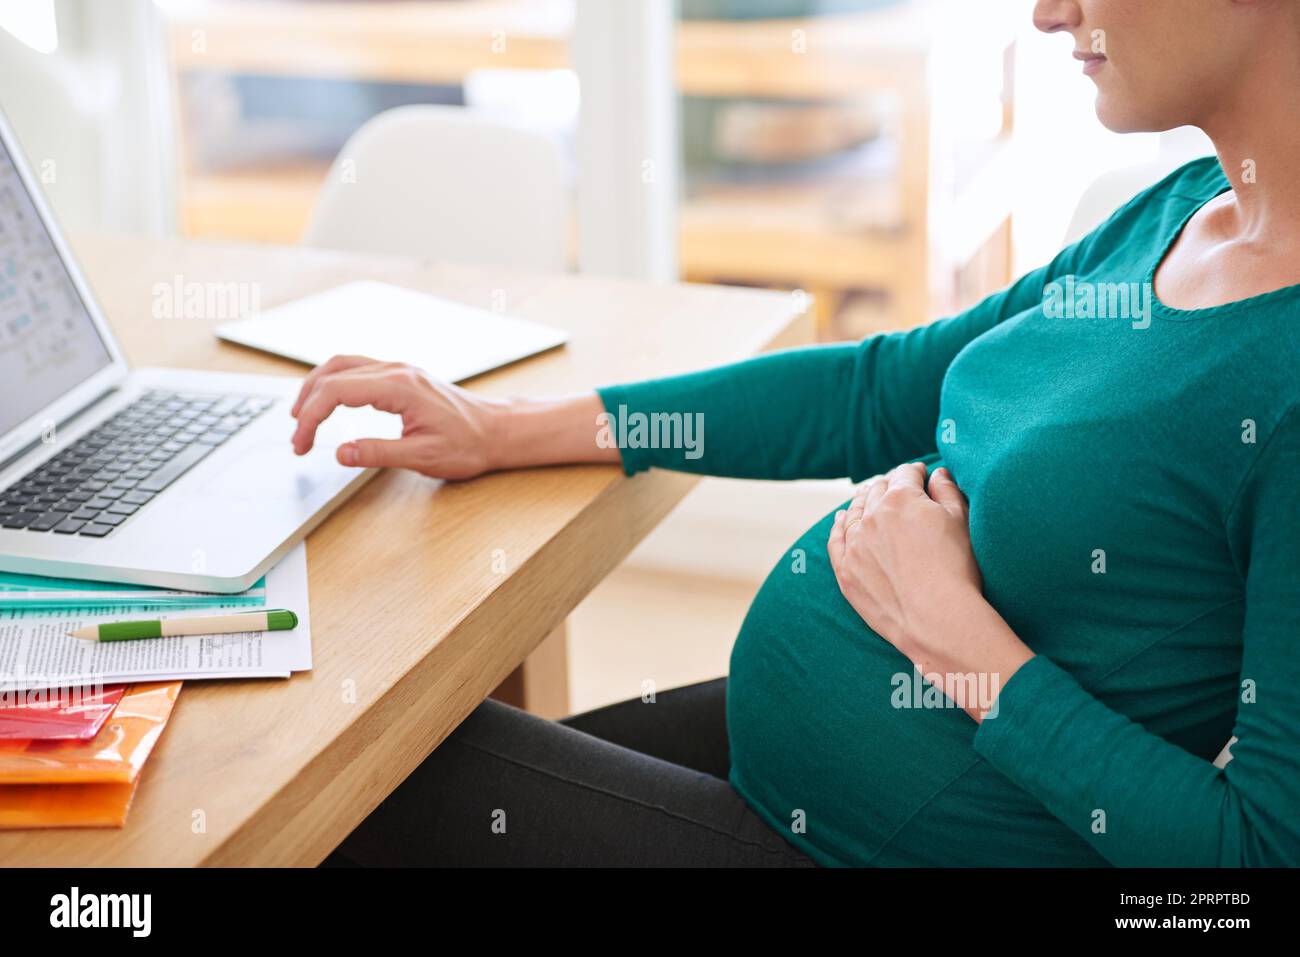 Gathering some parenting advice online. a pregnant woman using her laptop at home. Stock Photo